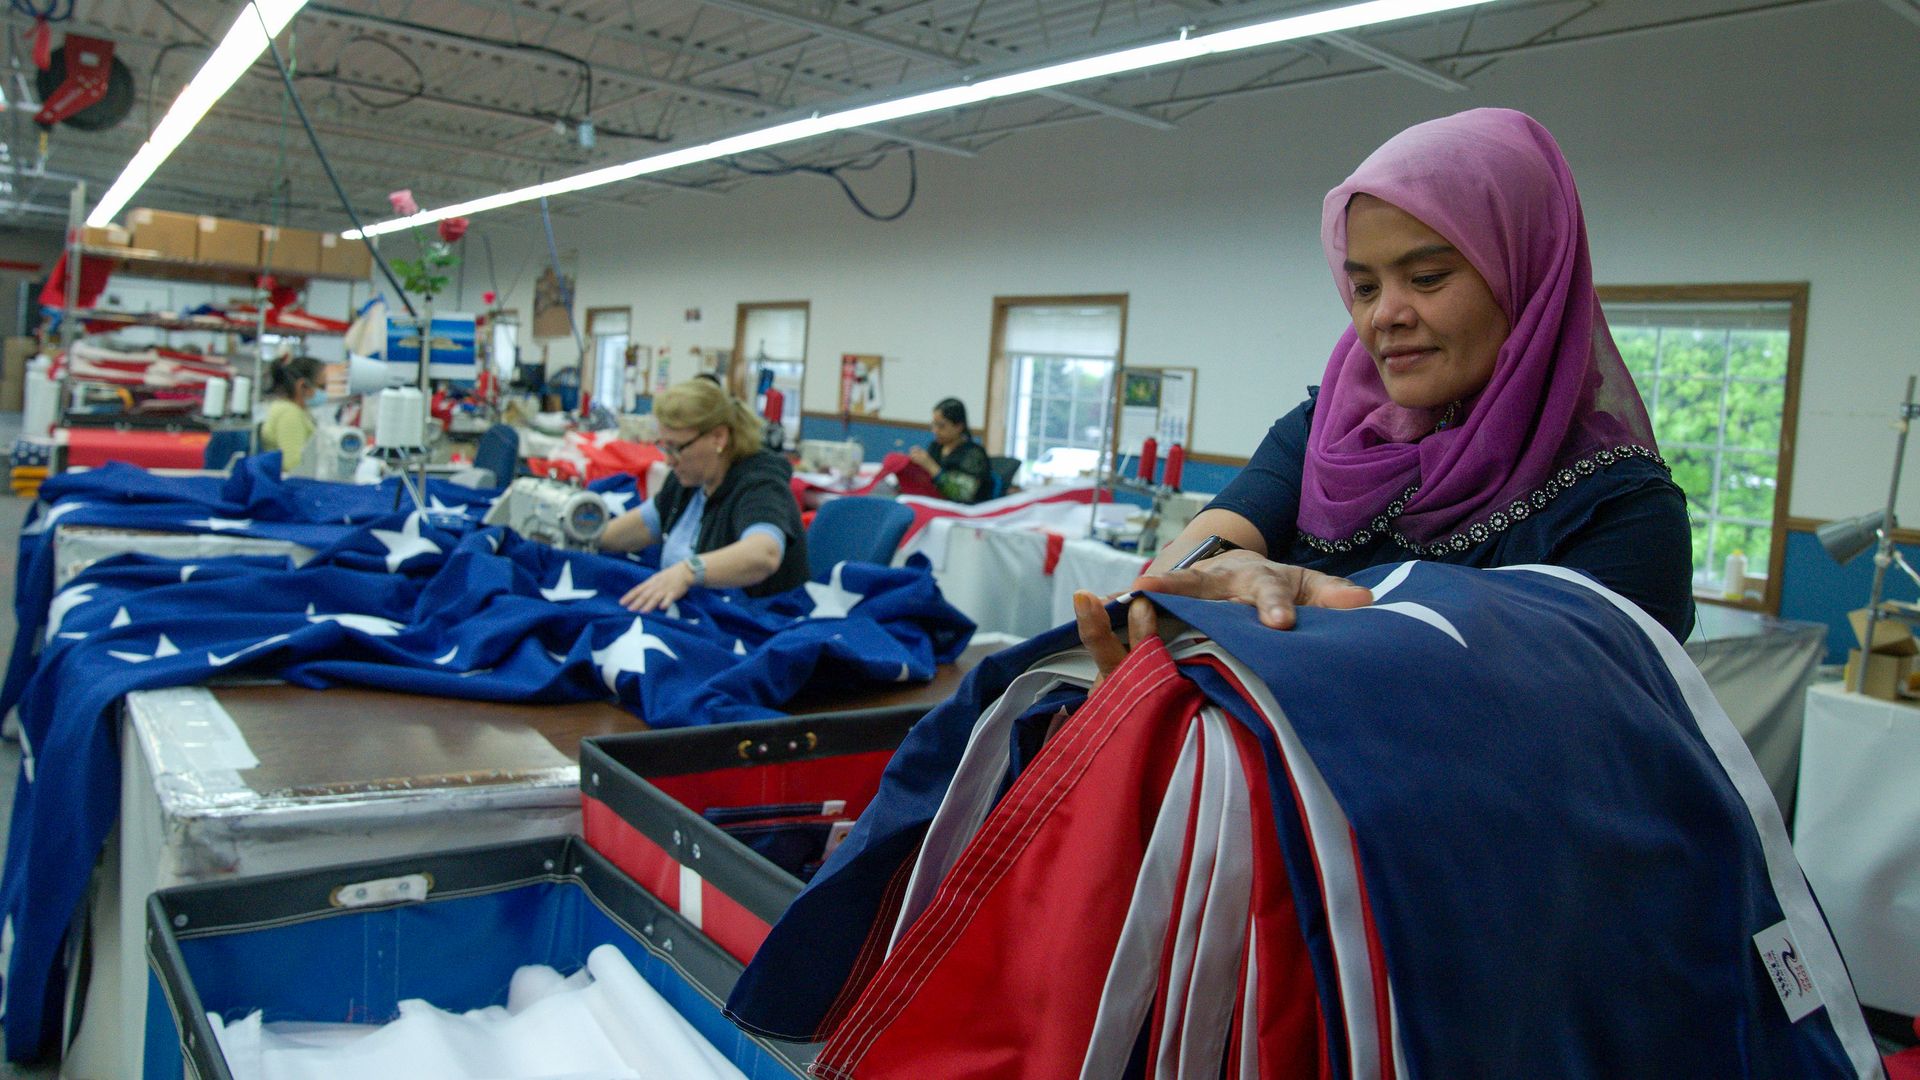 Immigrant employees at the Eder Flag factory in Oak Creek, Wisconsin, work on American flags in the new film "The Flagmakers."